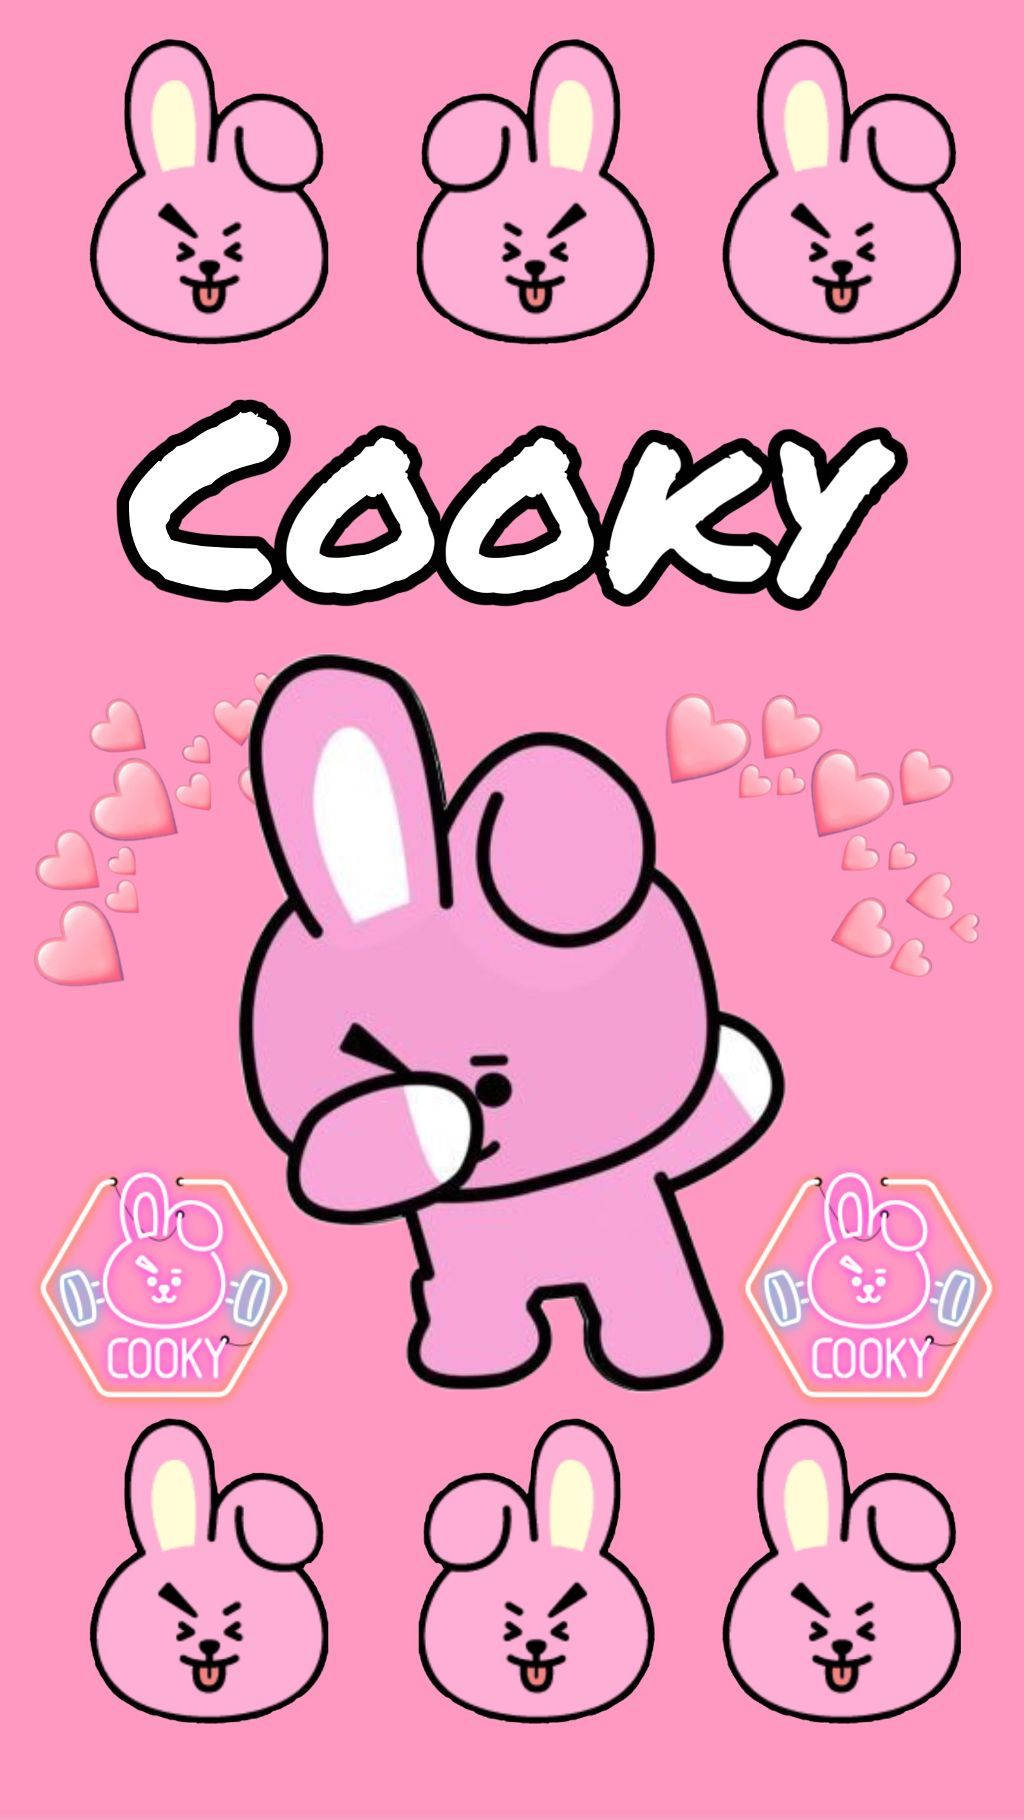 Adorable Cooky Bt21 In A Dab Pose Background